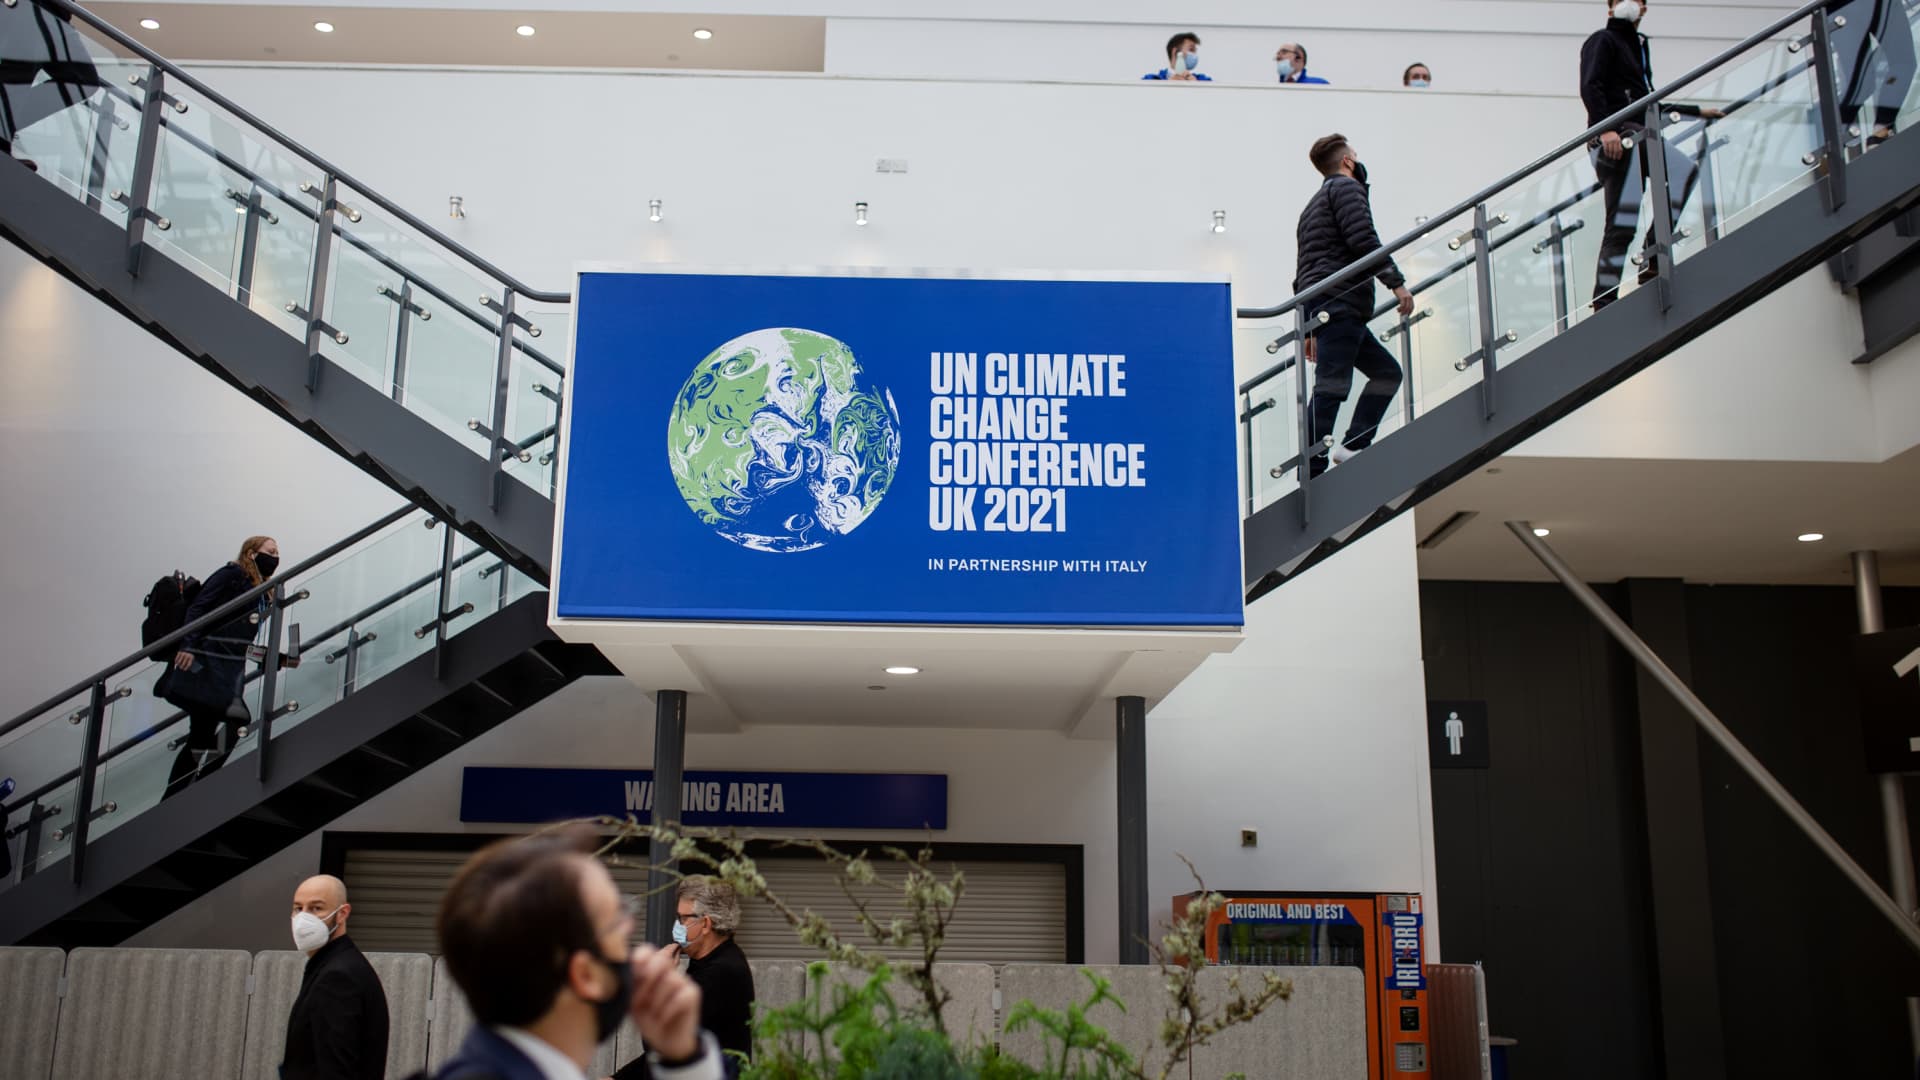 Visitors walk past a sign in the blue zone at the COP26 UN Climate Change Conference in Glasgow, U.K., on Sunday, Oct. 31, 2021.